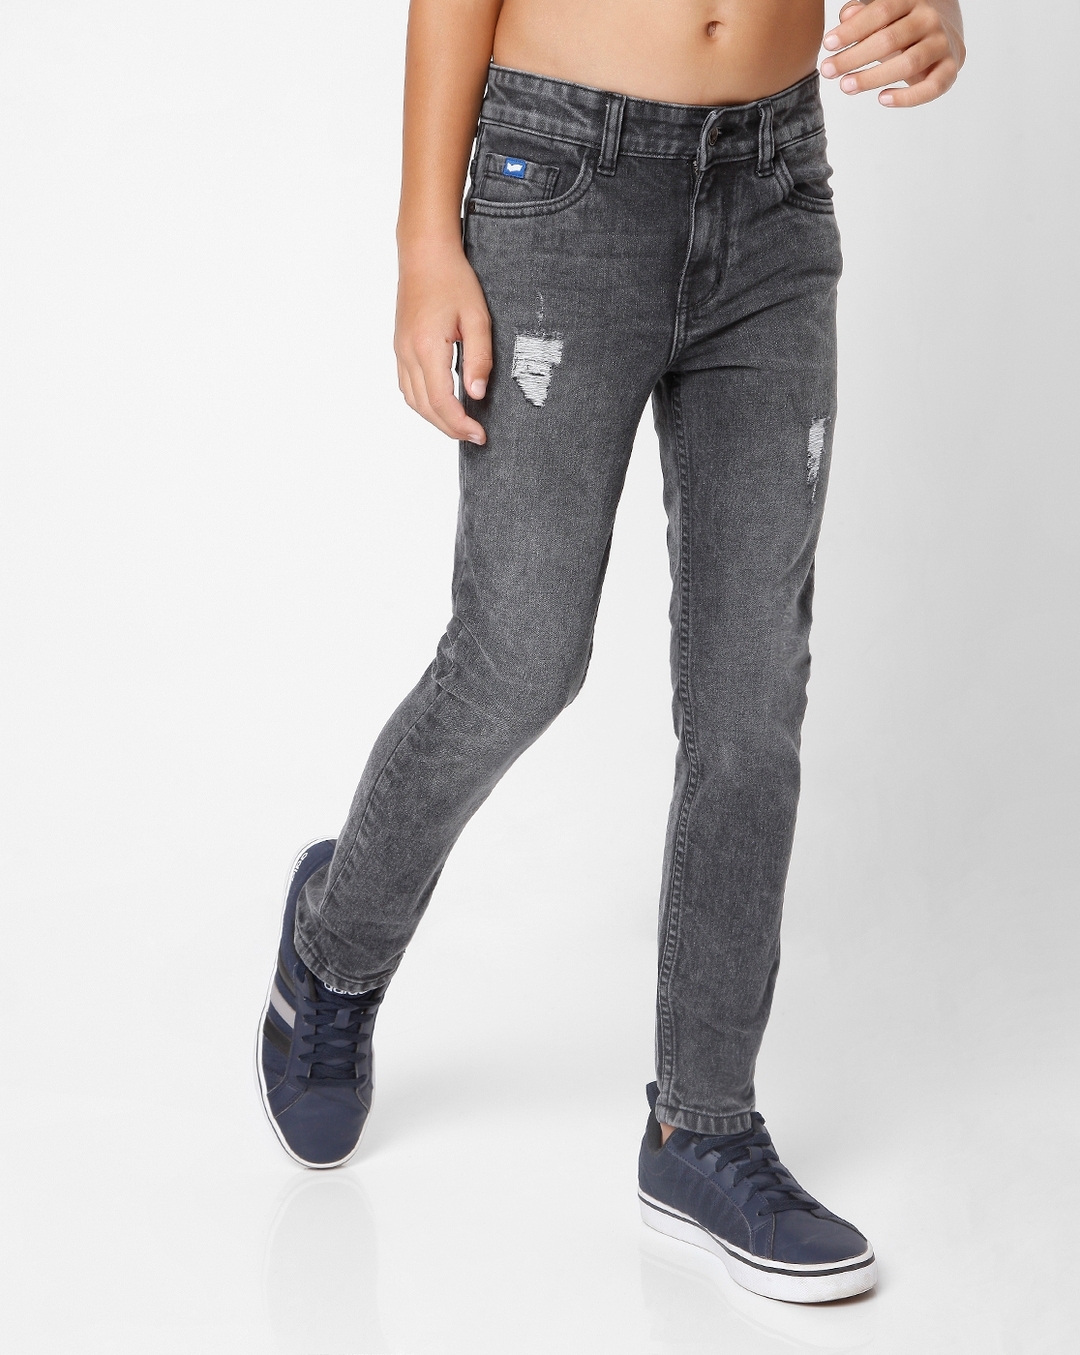 Buy Grey Super Slim Fit Distressed Stretch Jeans Online at Muftijeans